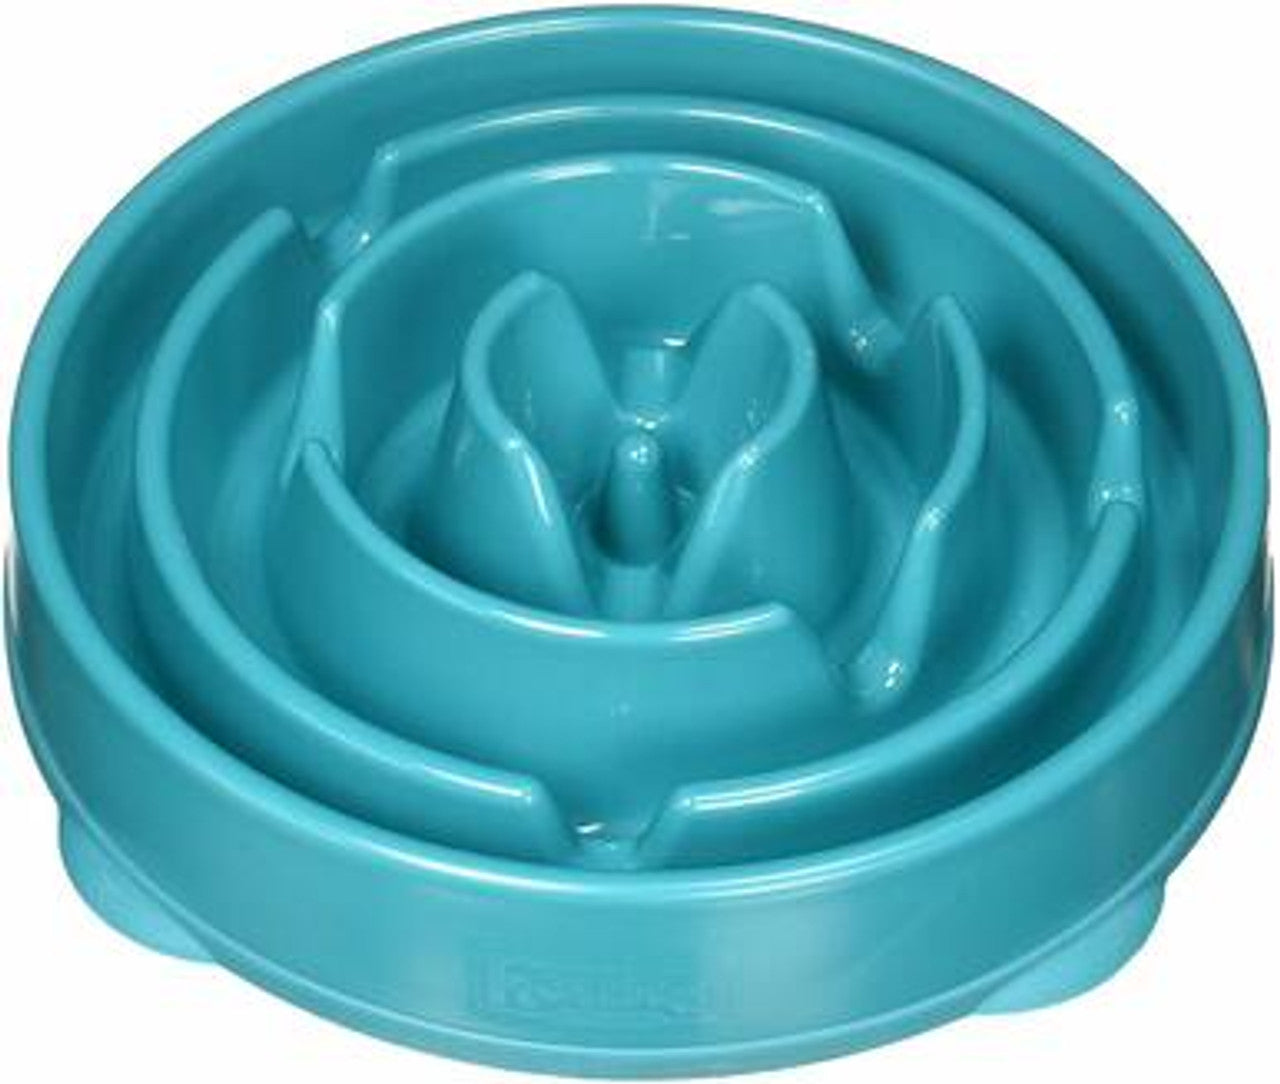 OUTWARD HOUND: Slo Feed Bowl Teal Small